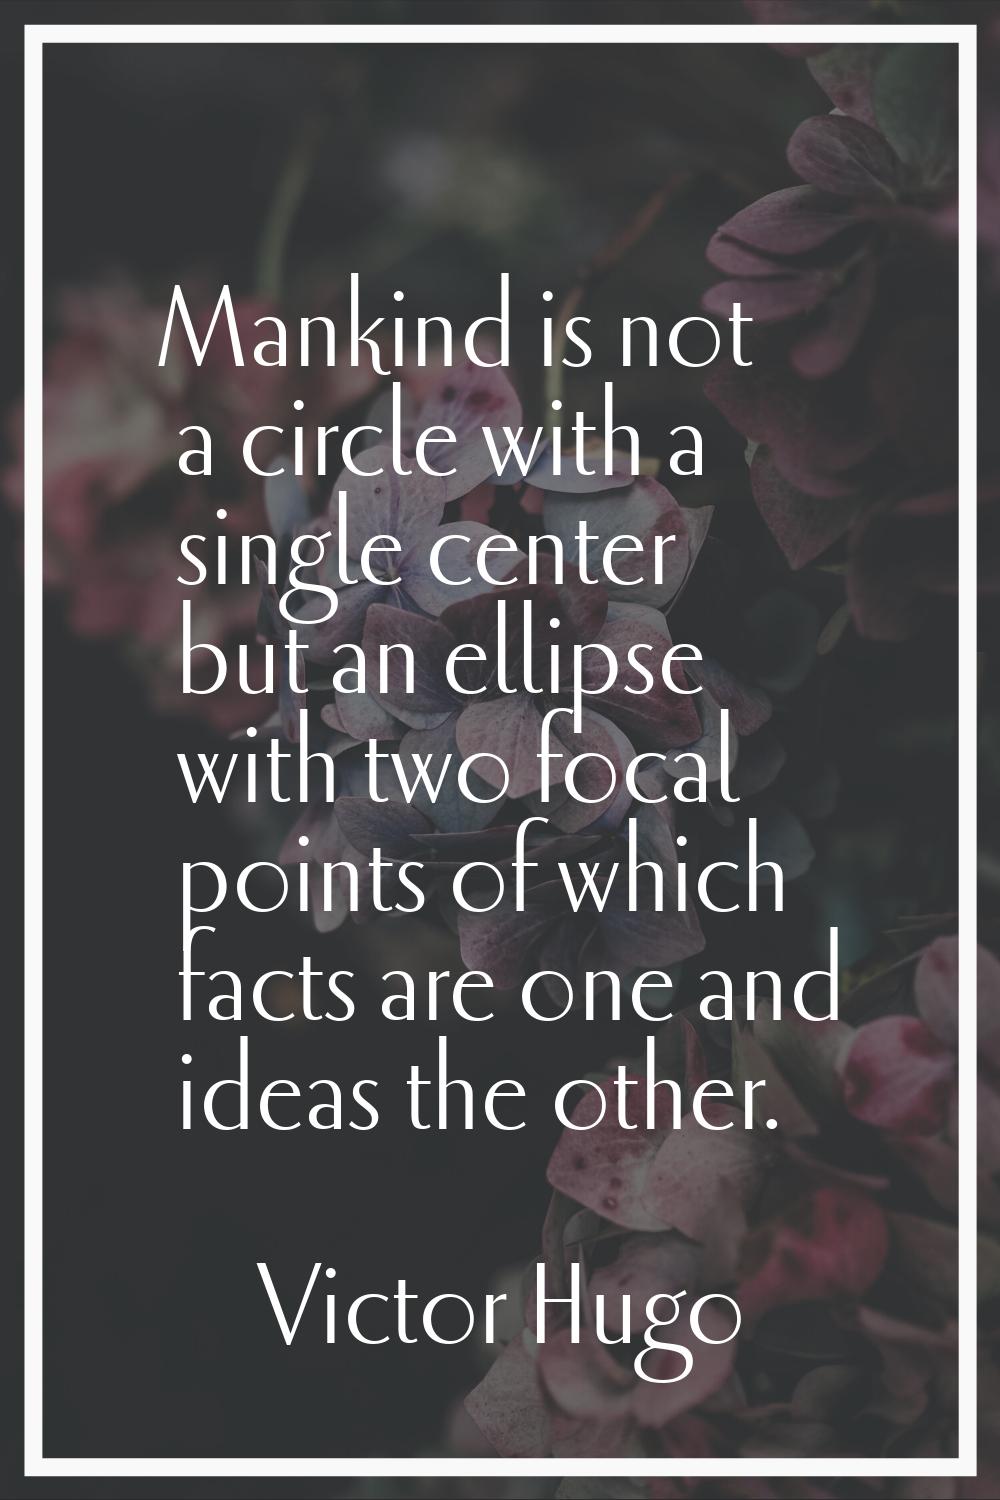 Mankind is not a circle with a single center but an ellipse with two focal points of which facts ar